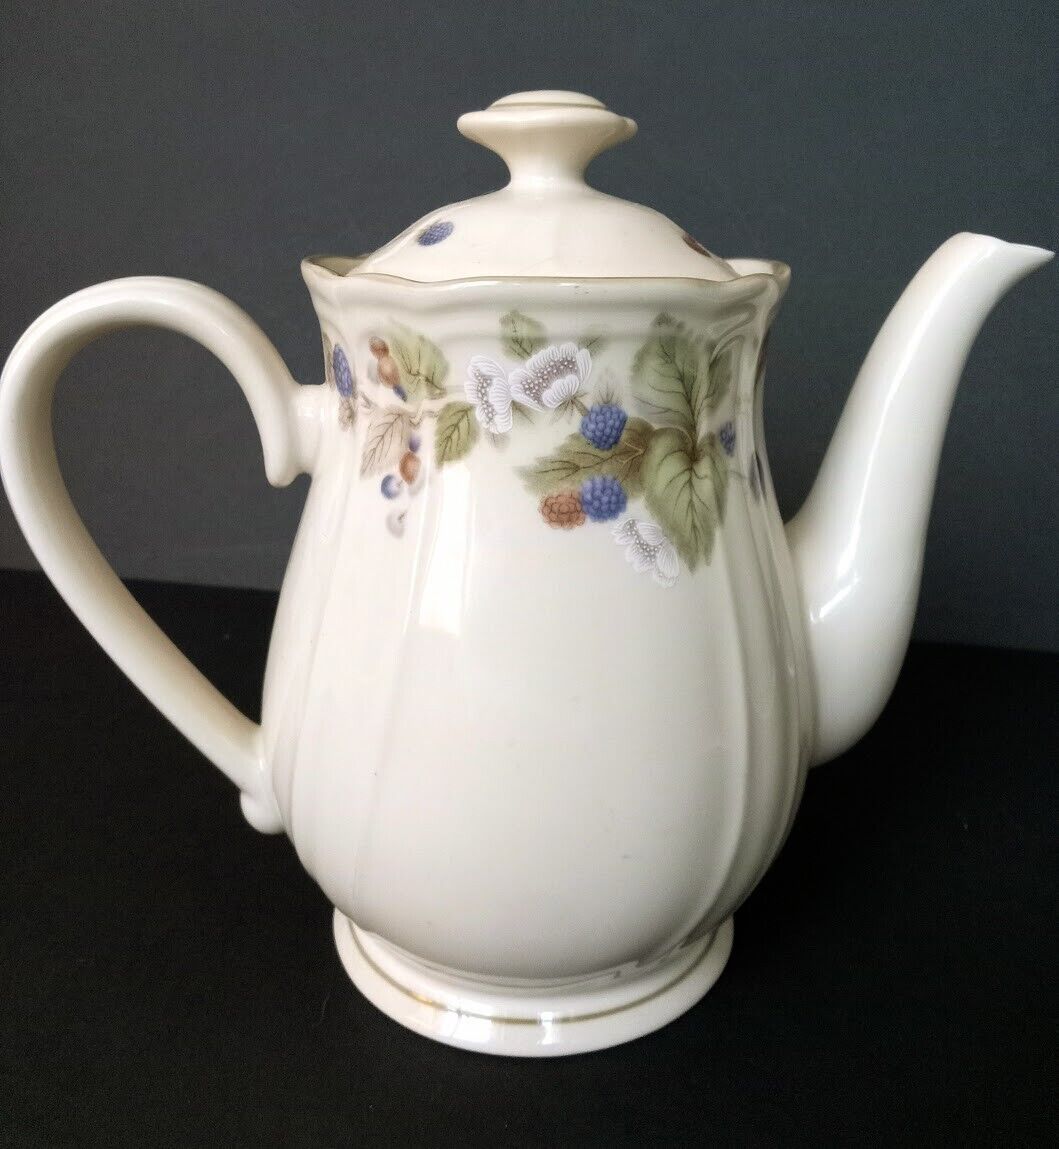 Vintage Epoch Ceramic Summer Hill Teapot with Blackberries, Blooms Leaves 1980's